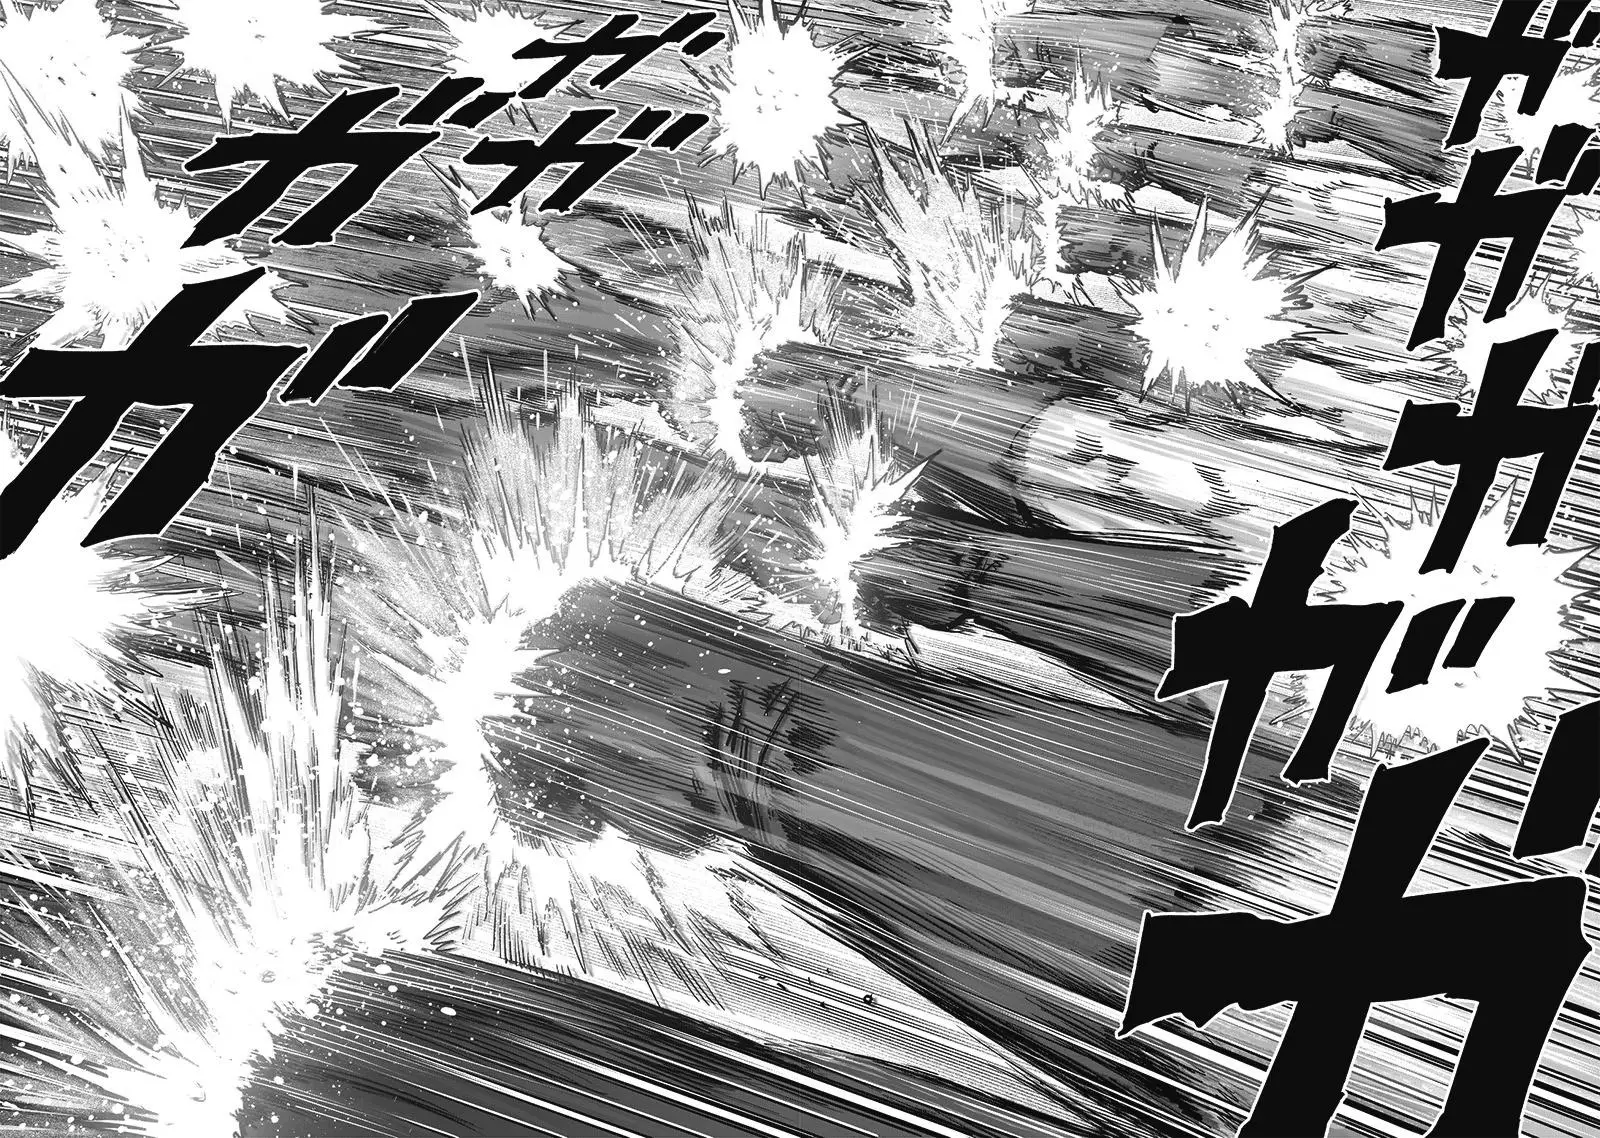 One Punch Man Chapter 165, READ One Punch Man Chapter 165 ONLINE, lost in the cloud genre,lost in the cloud gif,lost in the cloud girl,lost in the cloud goods,lost in the cloud goodreads,lost in the cloud,lost ark cloud gaming,lost odyssey cloud gaming,lost in the cloud fanart,lost in the cloud fanfic,lost in the cloud fandom,lost in the cloud first kiss,lost in the cloud font,lost in the cloud ending,lost in the cloud episode 97,lost in the cloud edit,lost in the cloud explained,lost in the cloud dog,lost in the cloud discord server,lost in the cloud desktop wallpaper,lost in the cloud drawing,can't find my cloud on network,lost in the cloud characters,lost in the cloud chapter 93 release date,lost in the cloud birthday,lost in the cloud birthday art,lost in the cloud background,lost in the cloud banner,lost in the clouds meaning,what is the black cloud in lost,lost in the cloud ao3,lost in the cloud anime,lost in the cloud art,lost in the cloud author twitter,lost in the cloud author instagram,lost in the cloud artist,lost in the cloud acrylic stand,lost in the cloud artist twitter,lost in the cloud art style,lost in the cloud analysis